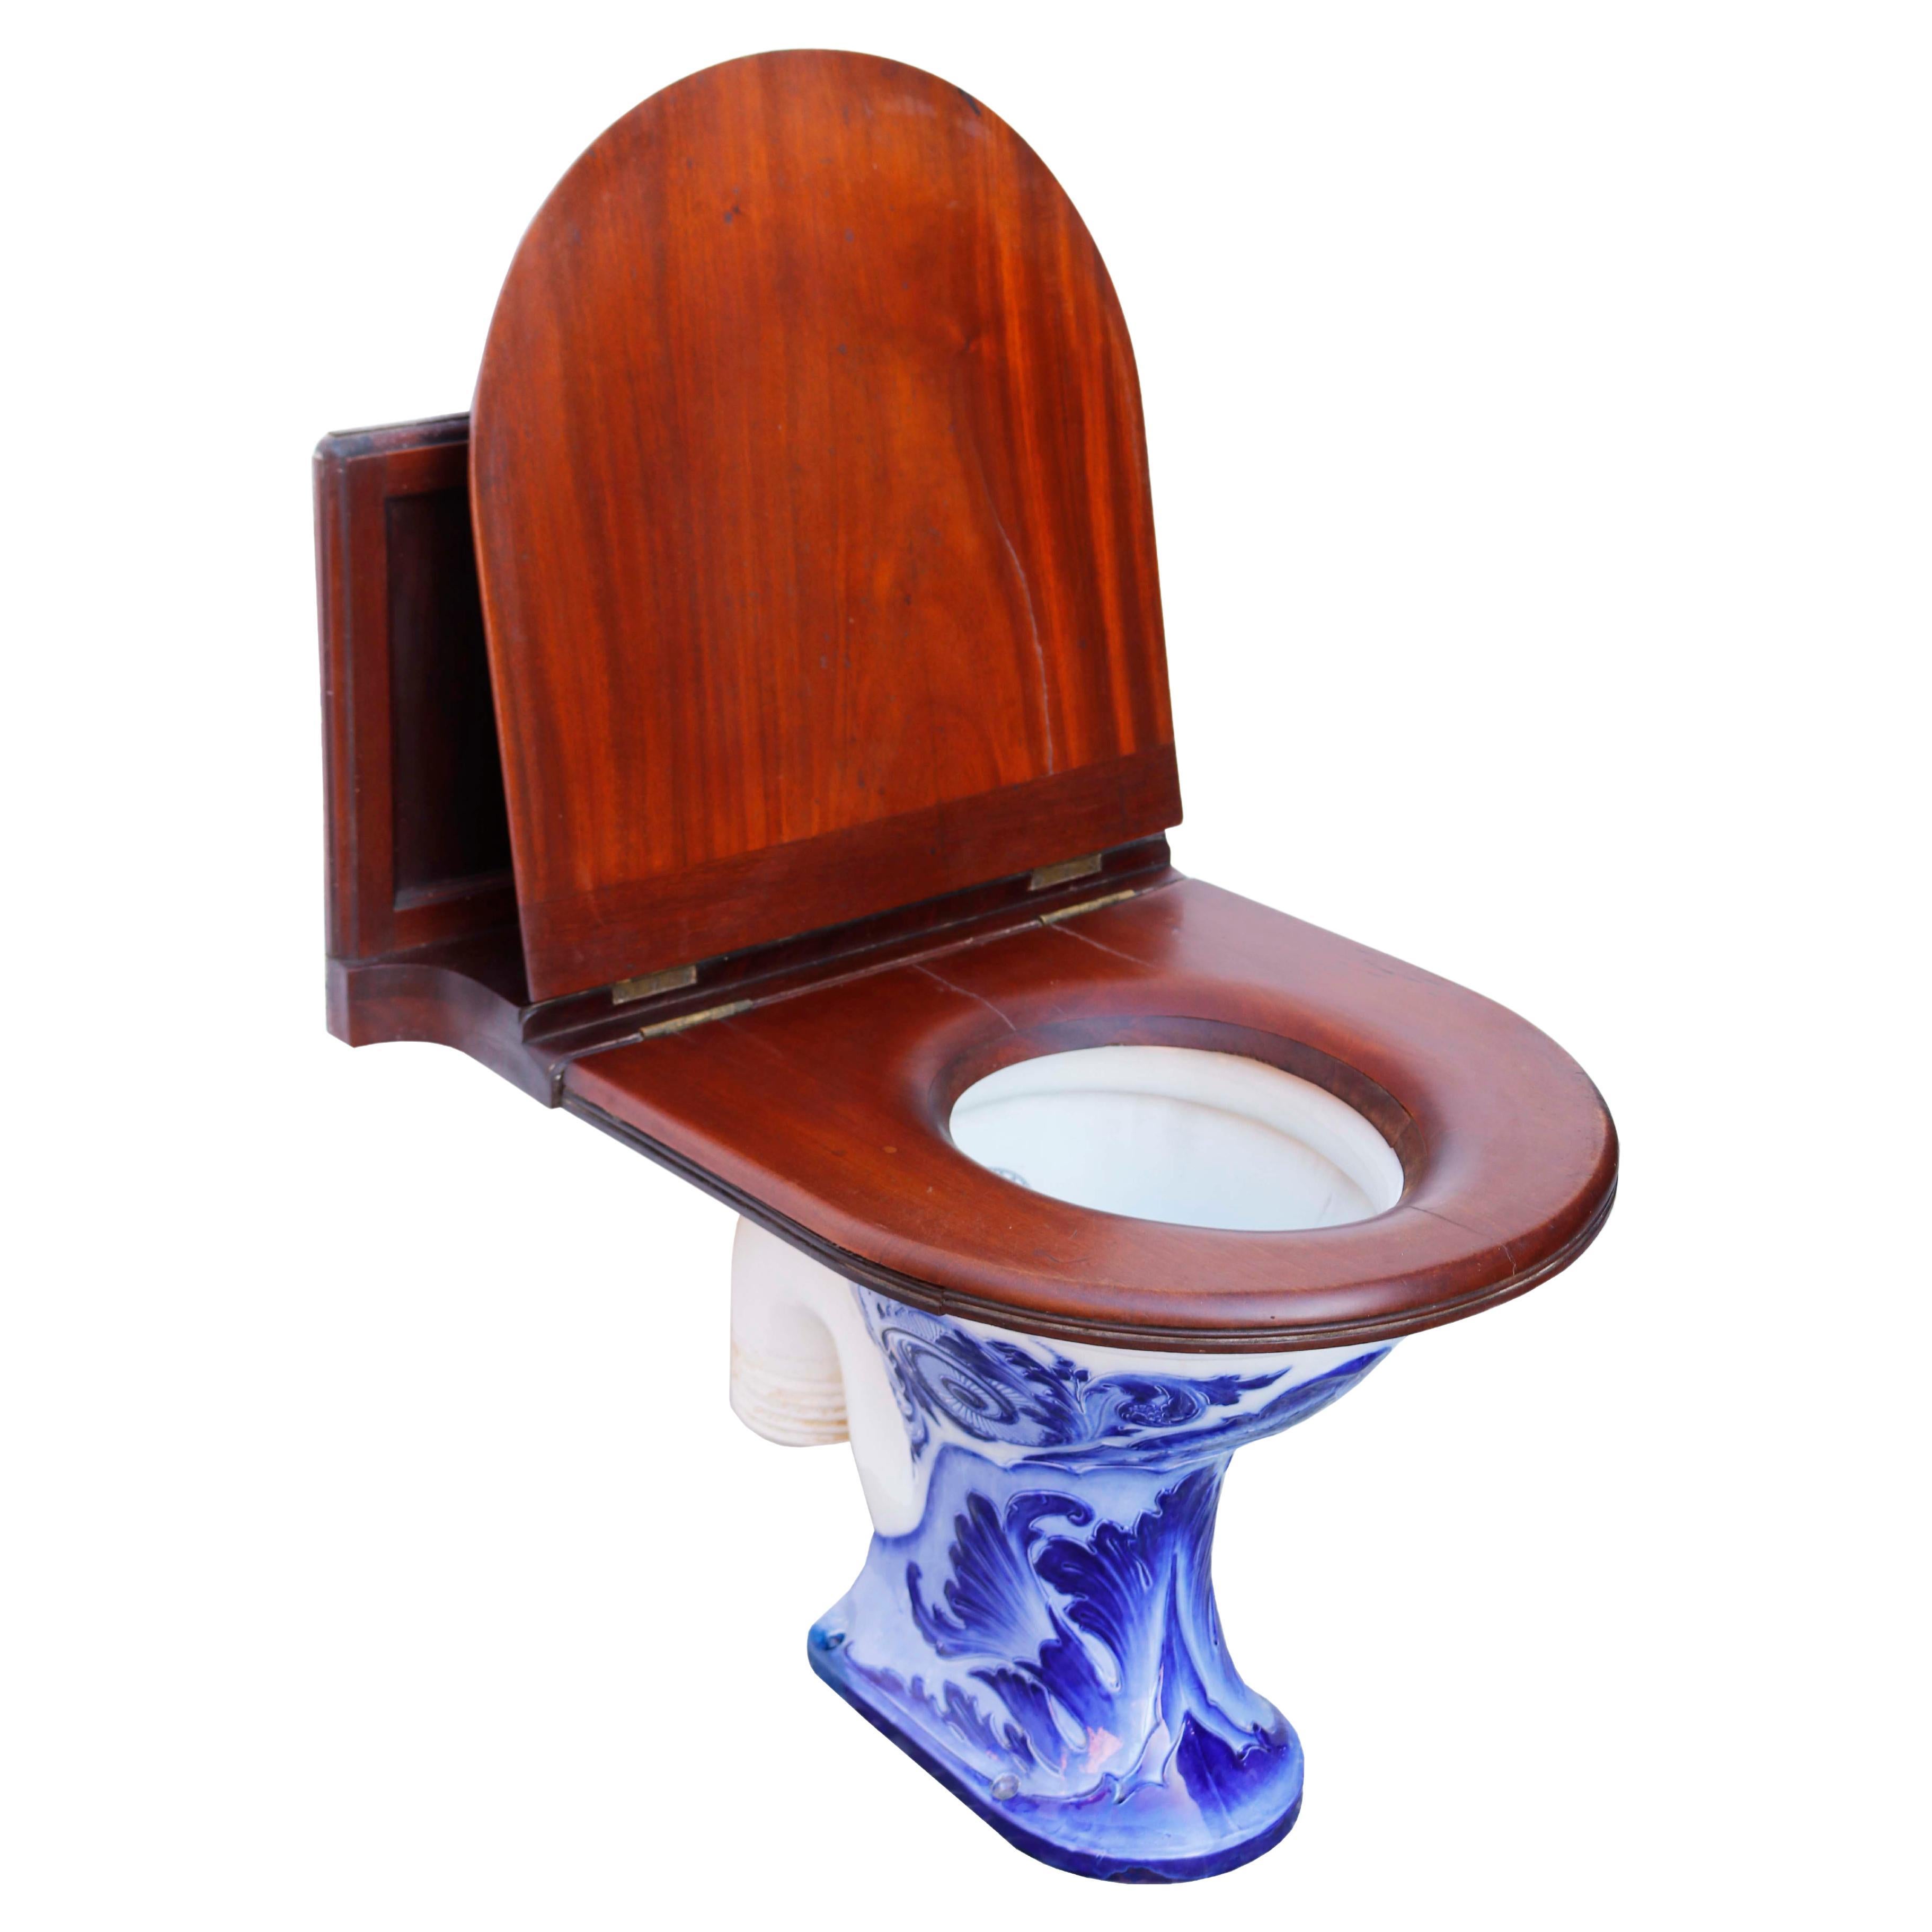 Antique Doulton and Co Glazed Toilet For Sale at 1stDibs